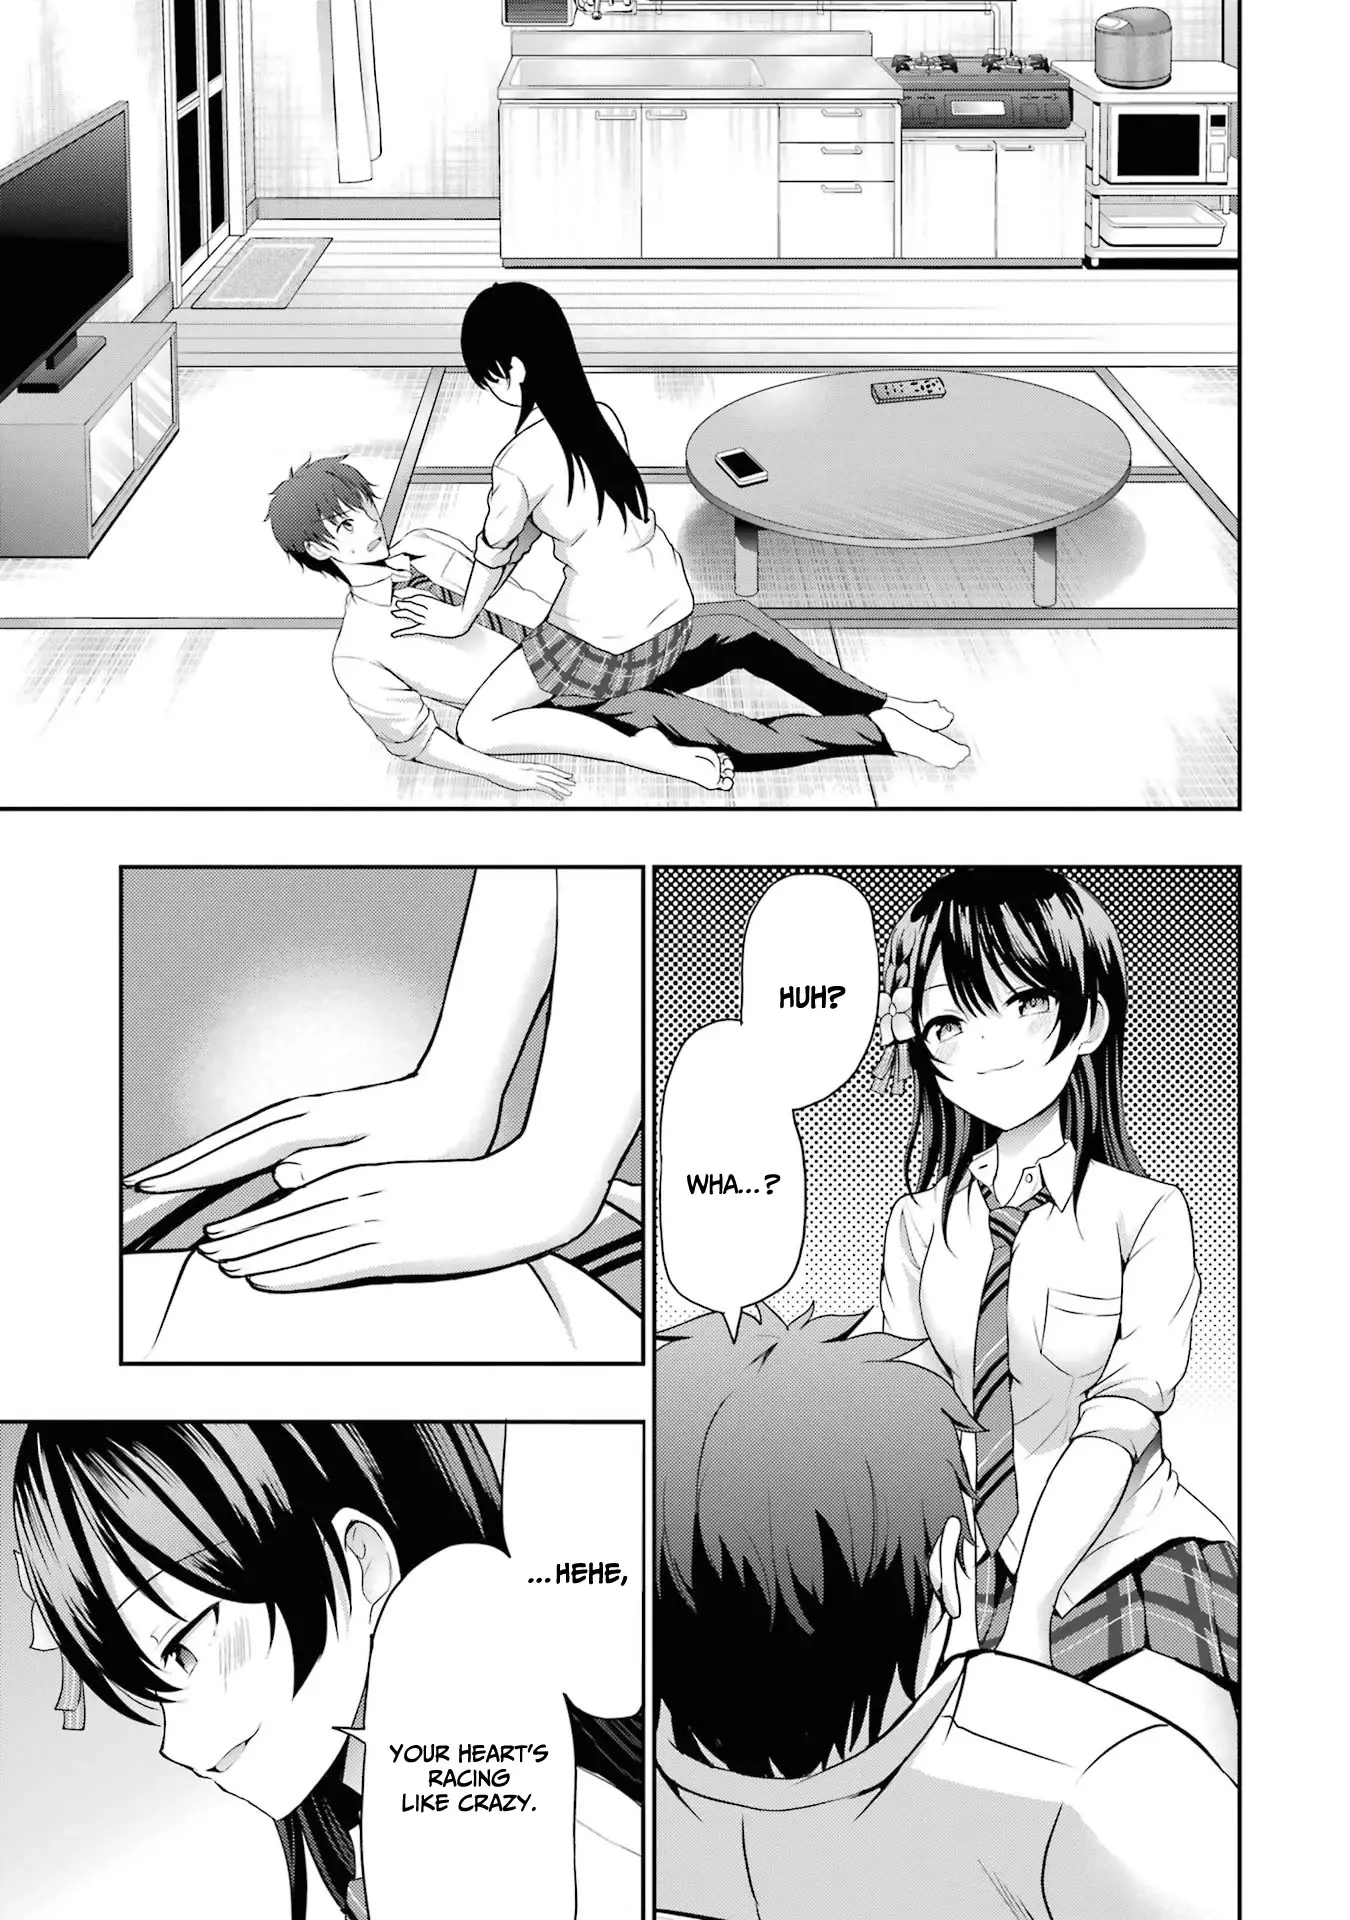 I Kissed My Girlfriend's Little Sister ♥ - 6 page 24-8247c05d